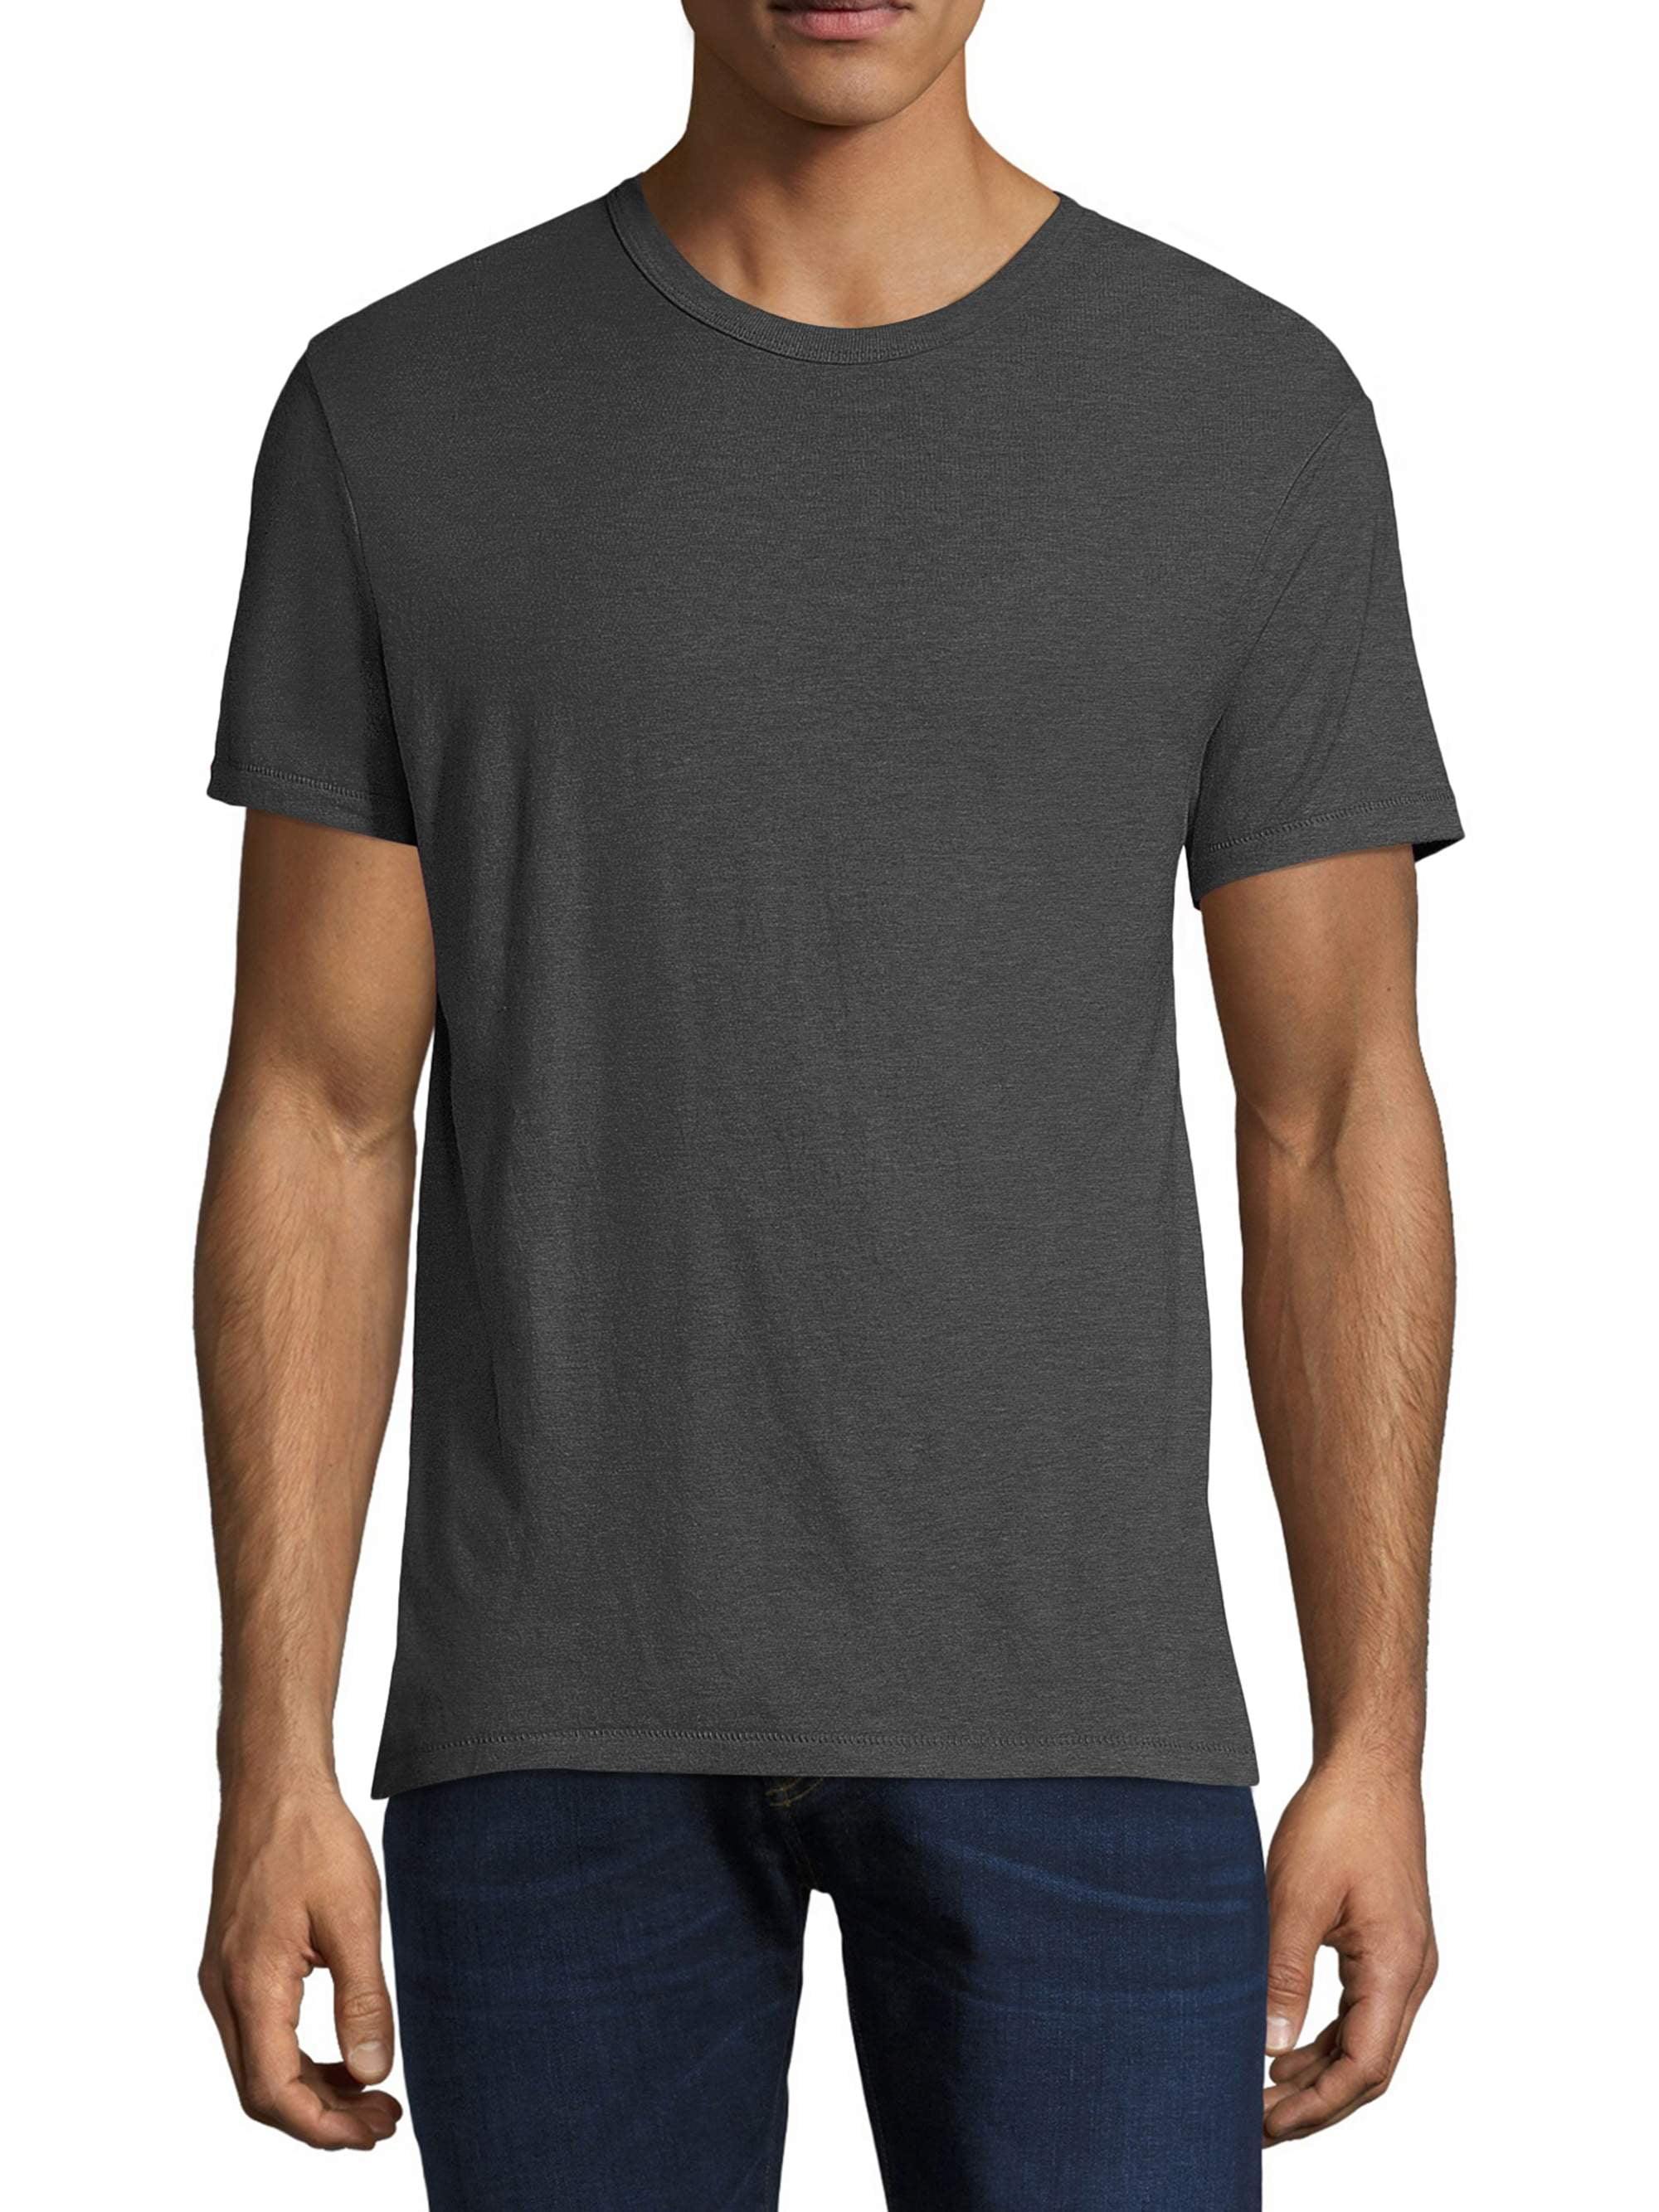 Hanes Men's and Big Men's Modal Triblend Short Sleeve Tee, Up To Size ...